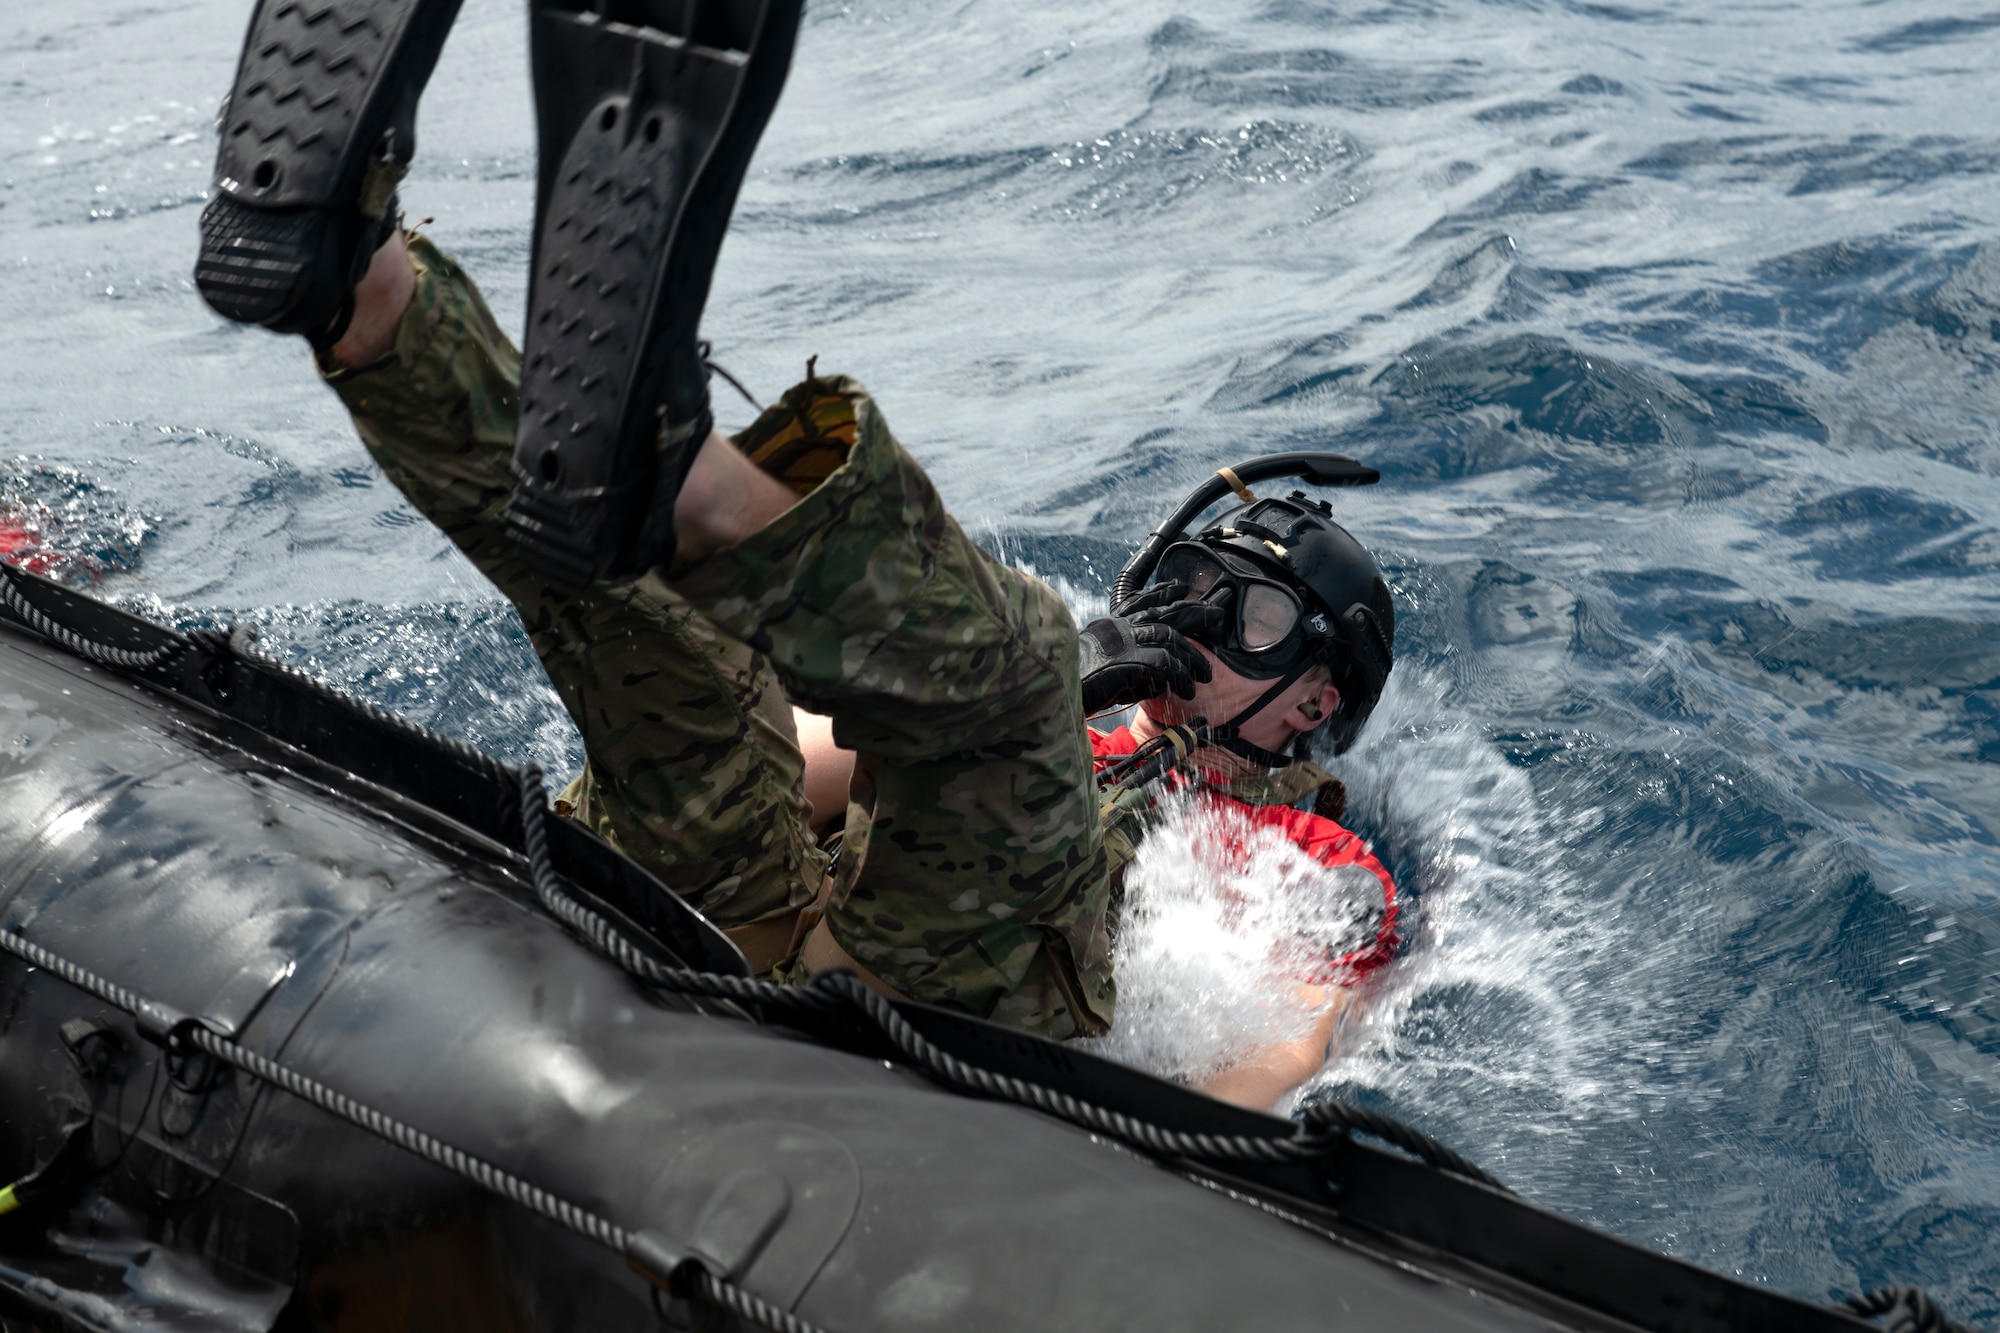 A U.S. Air Force pararescueman assigned to the 31st Rescue Squadron exits a combat rubber raiding craft during an amphibious search and rescue training in the Pacific Ocean, Sept. 13, 2022. These training exercises are designed to posture RQS’s to respond quickly and effectively to a wide range of possible contingencies. (U.S. Air Force photo by Senior Airman Jessi Roth)